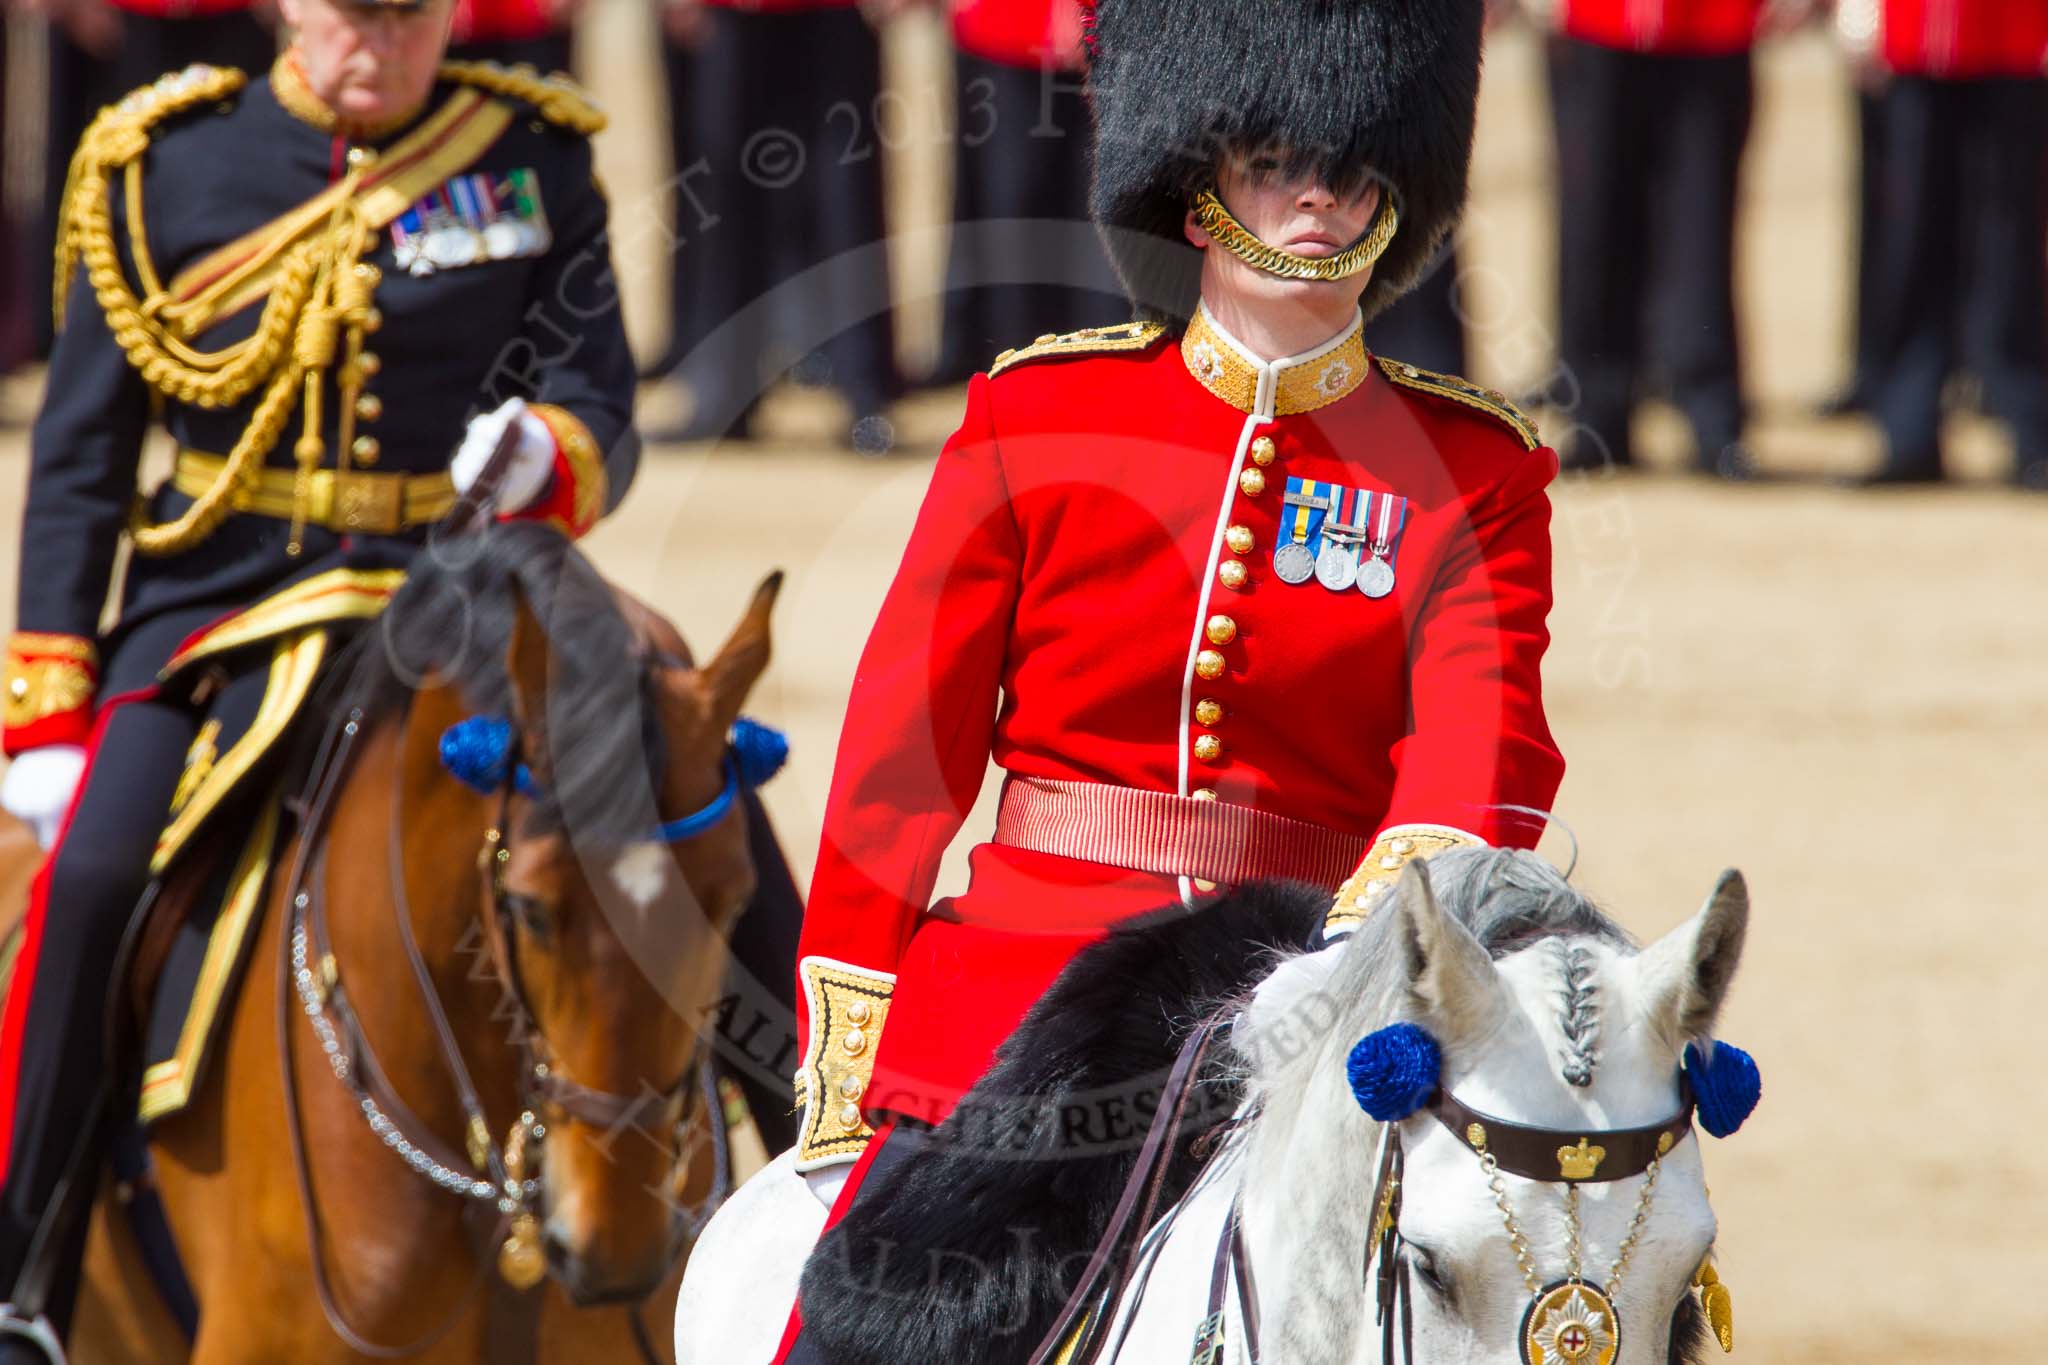 The Colonel's Review 2013.
Horse Guards Parade, Westminster,
London SW1,

United Kingdom,
on 08 June 2013 at 11:06, image #396